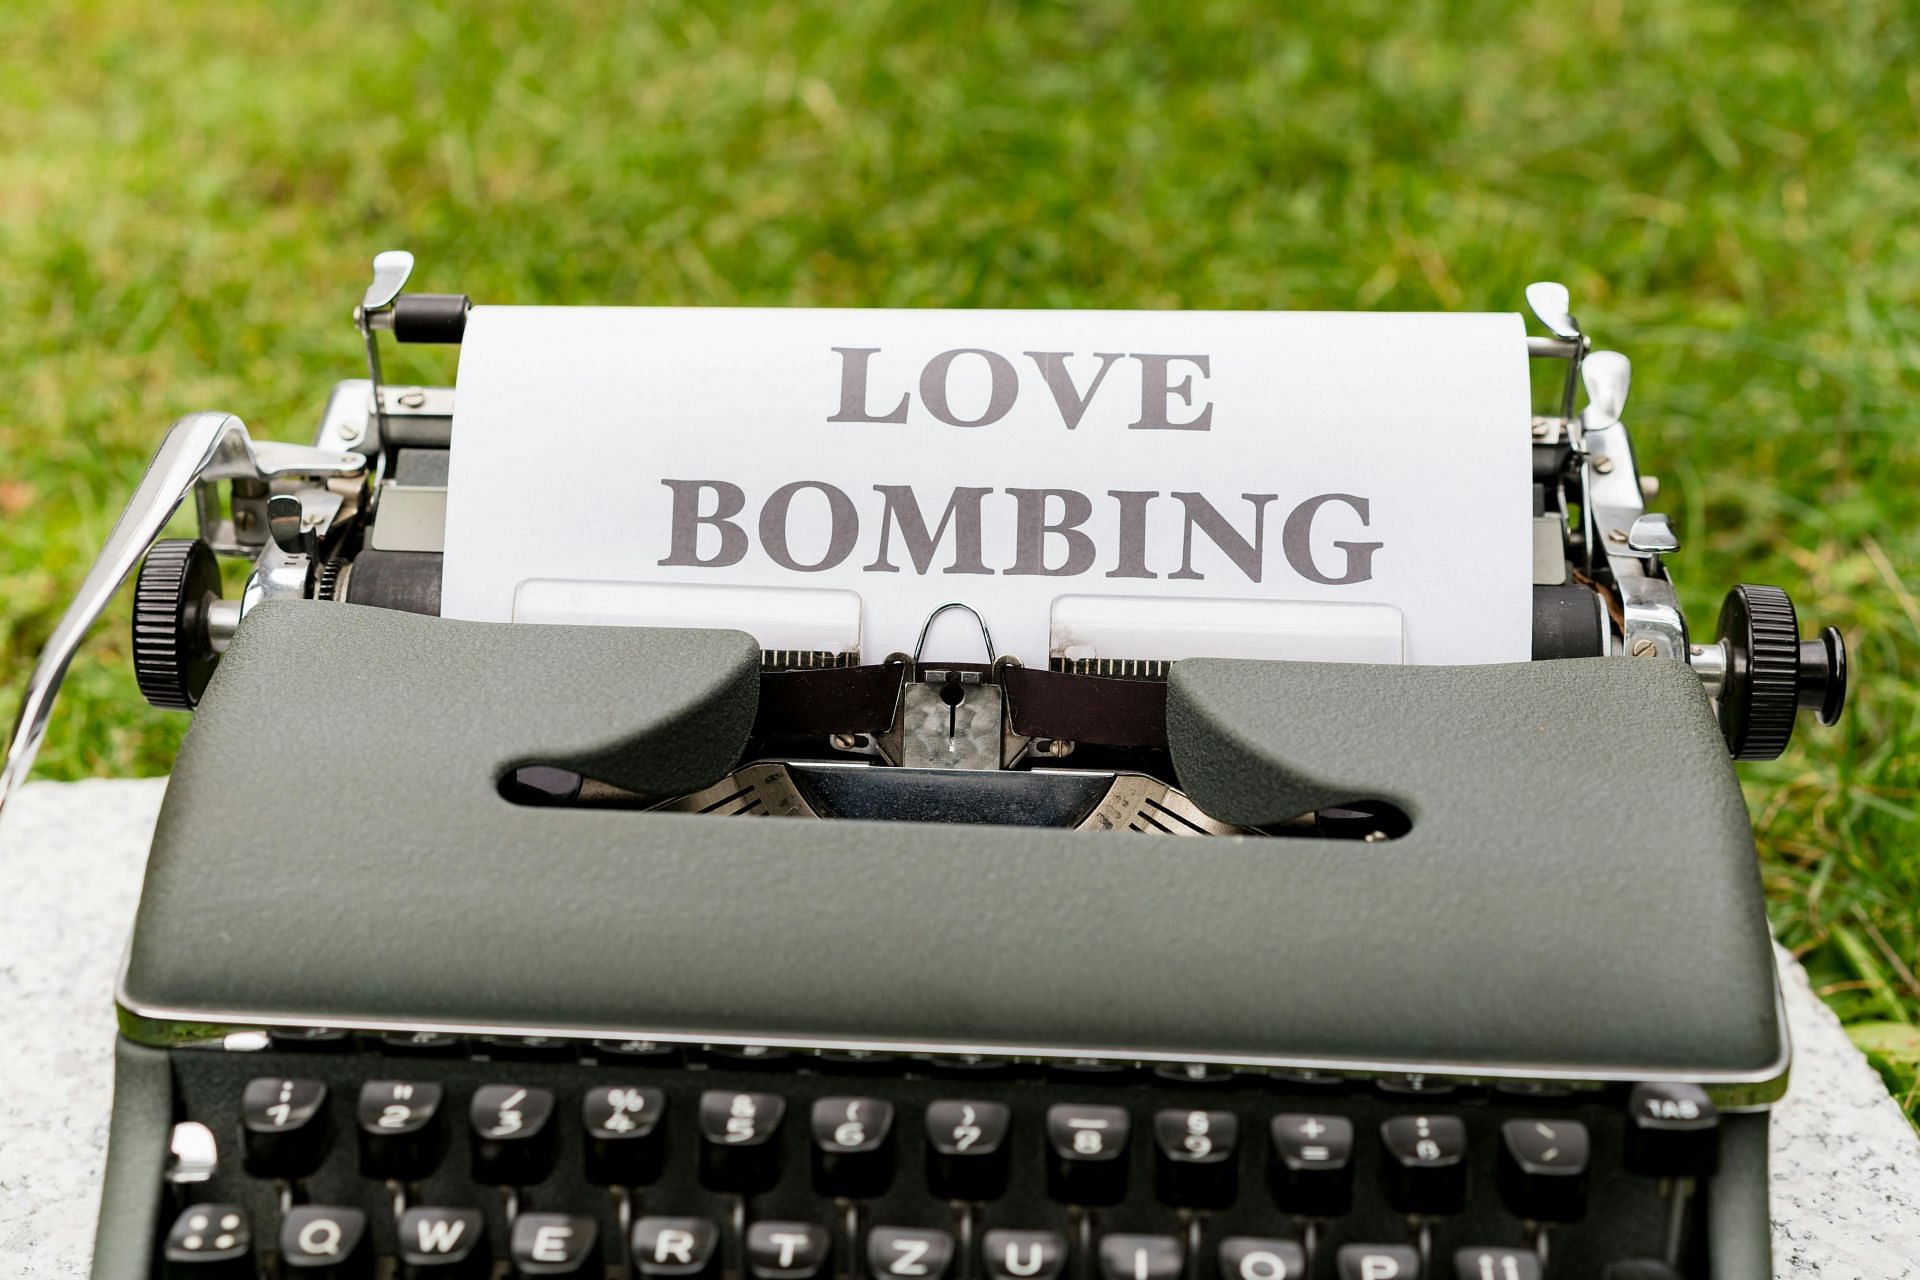 Love bombing is one of the common emotional manipulation techniques. (Image via Pexels/Markus Winkler)